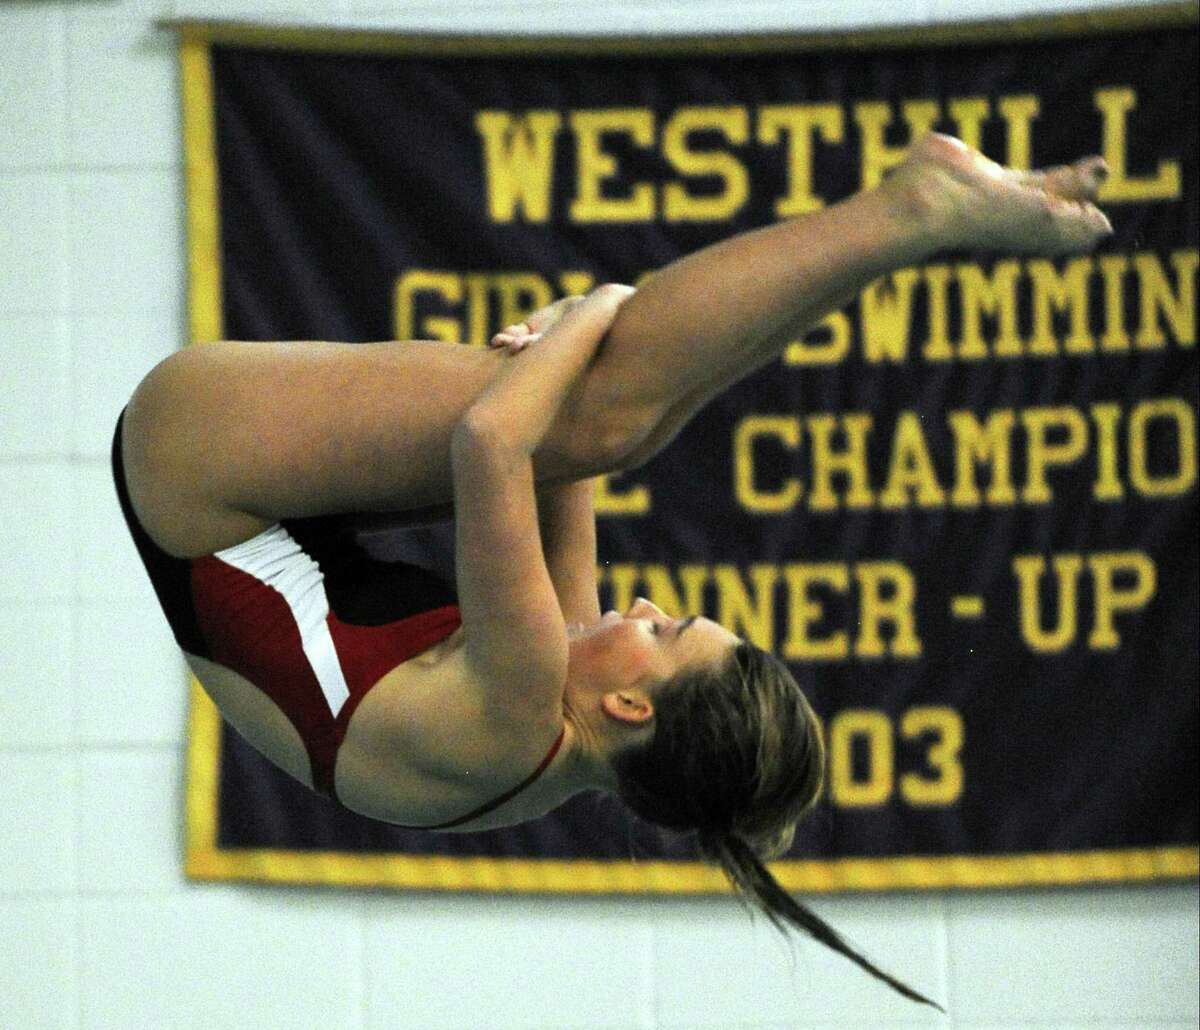 Competitors compete in the FCIAC Diving championships at Westhill High School in Stamford on Wednesday, Nov. 2, 2016.